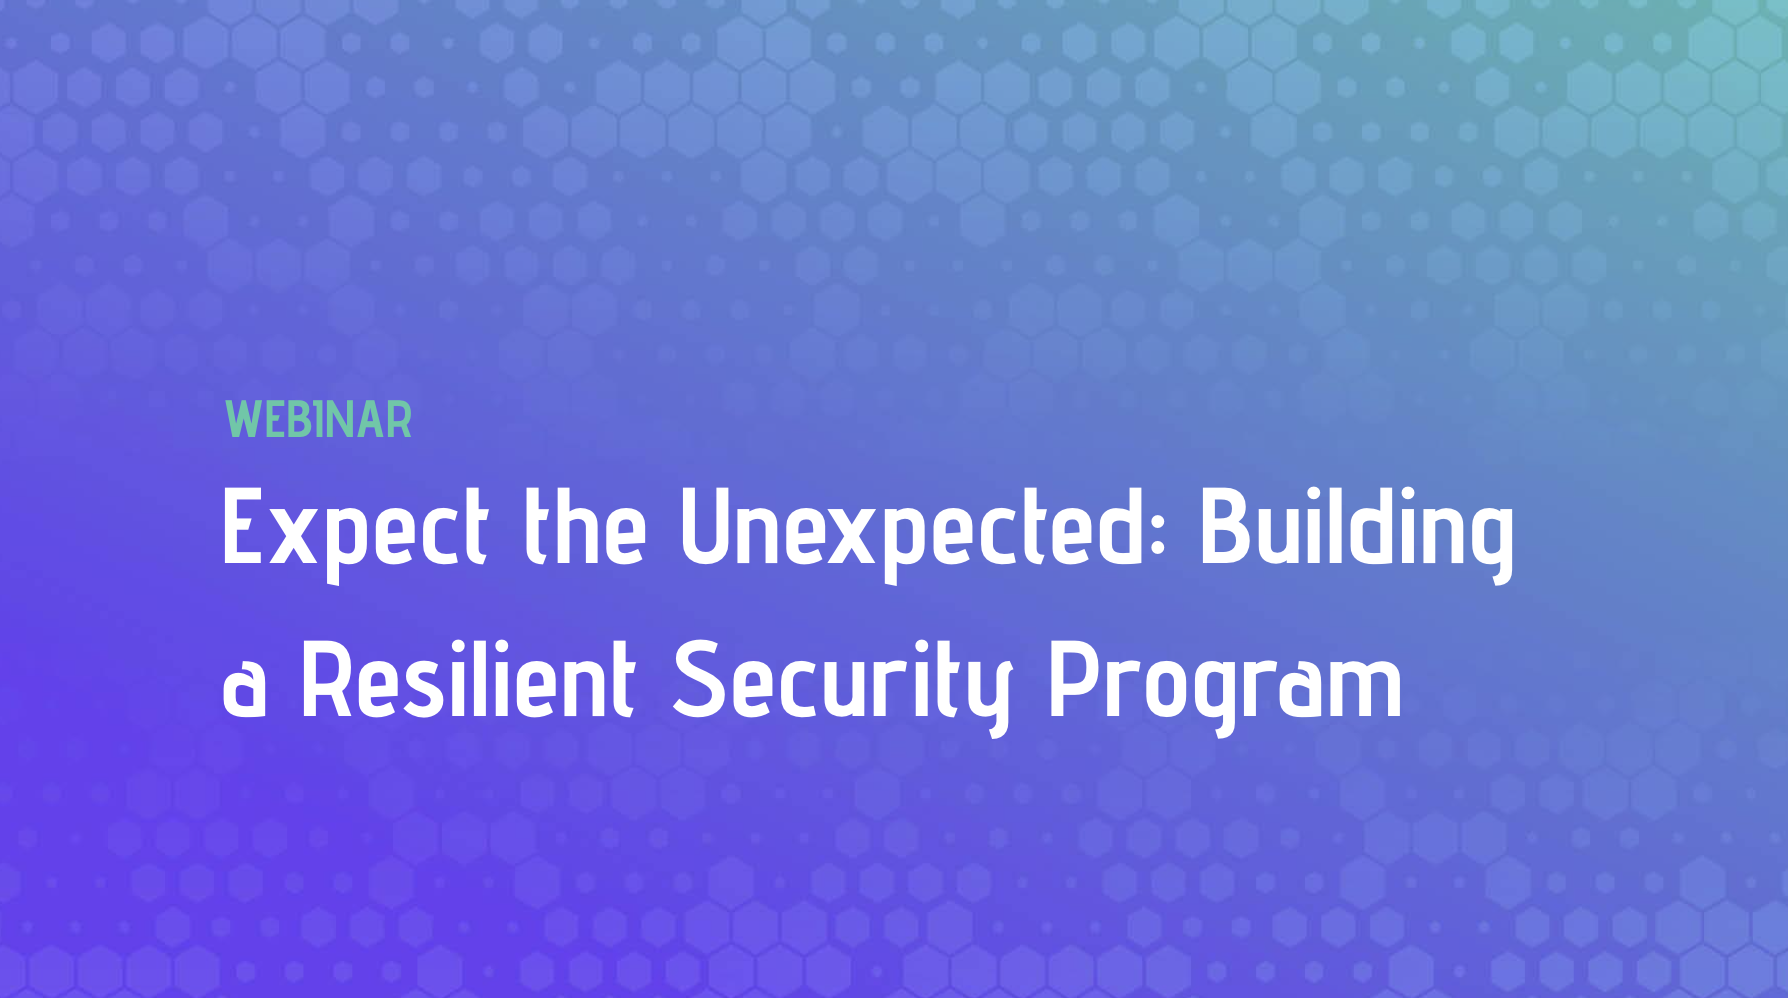 Expect the Unexpected: Building a Resilient Security Program